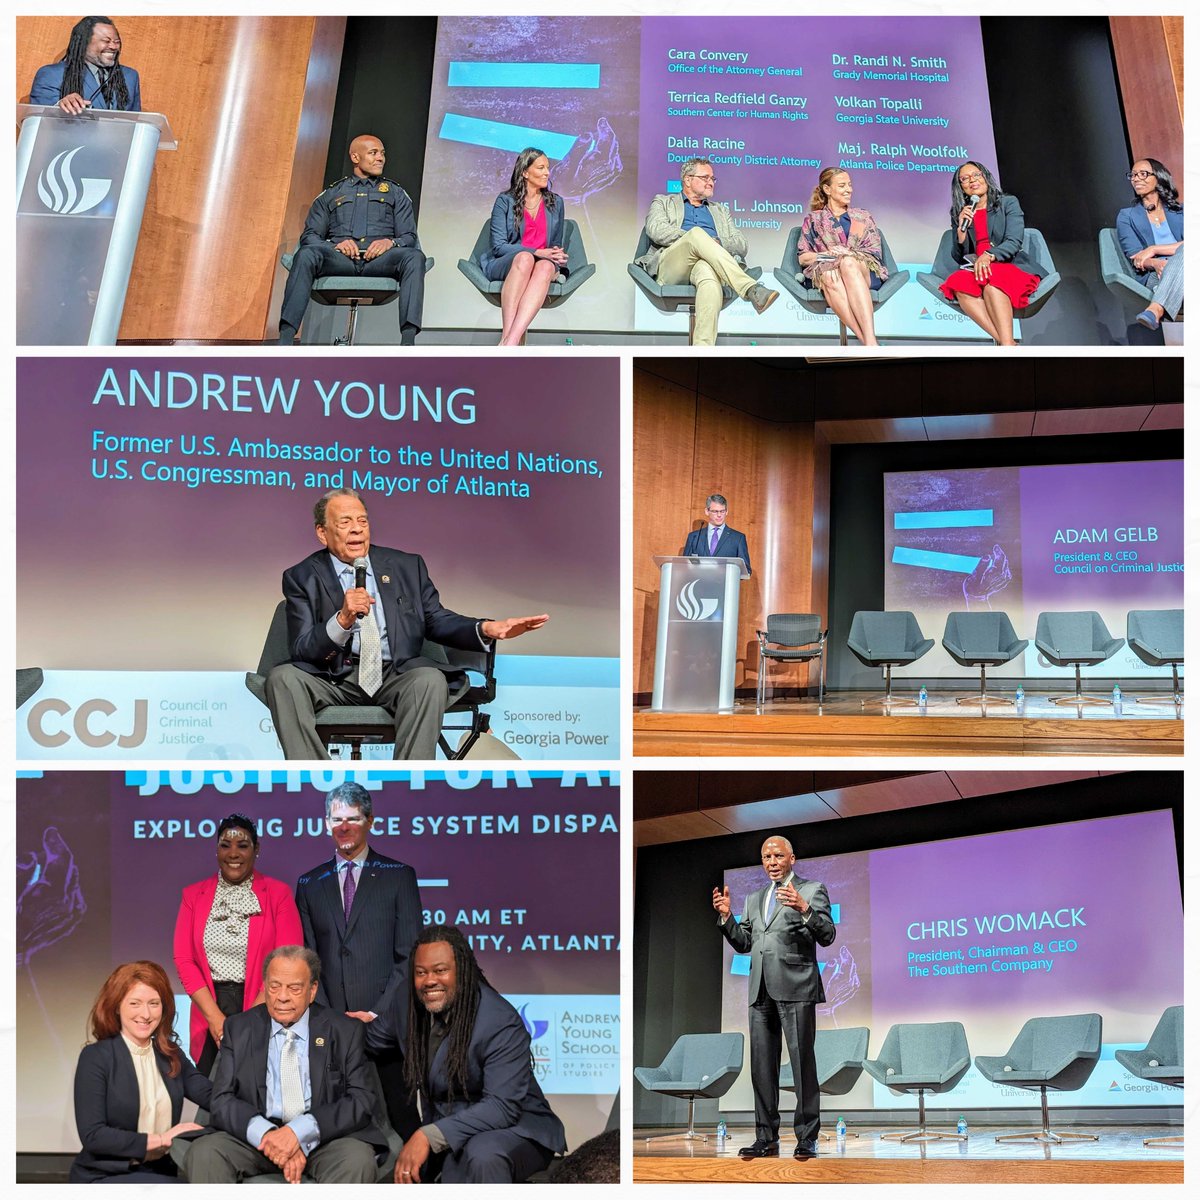 This week CCJ and @GeorgiaStateU's Andrew Young School of Policy Studies co-sponsored a discussion on racial disparities in the criminal justice system, exploring new findings from the Council’s Pushing Toward Parity project: counciloncj.foleon.com/reports/racial…